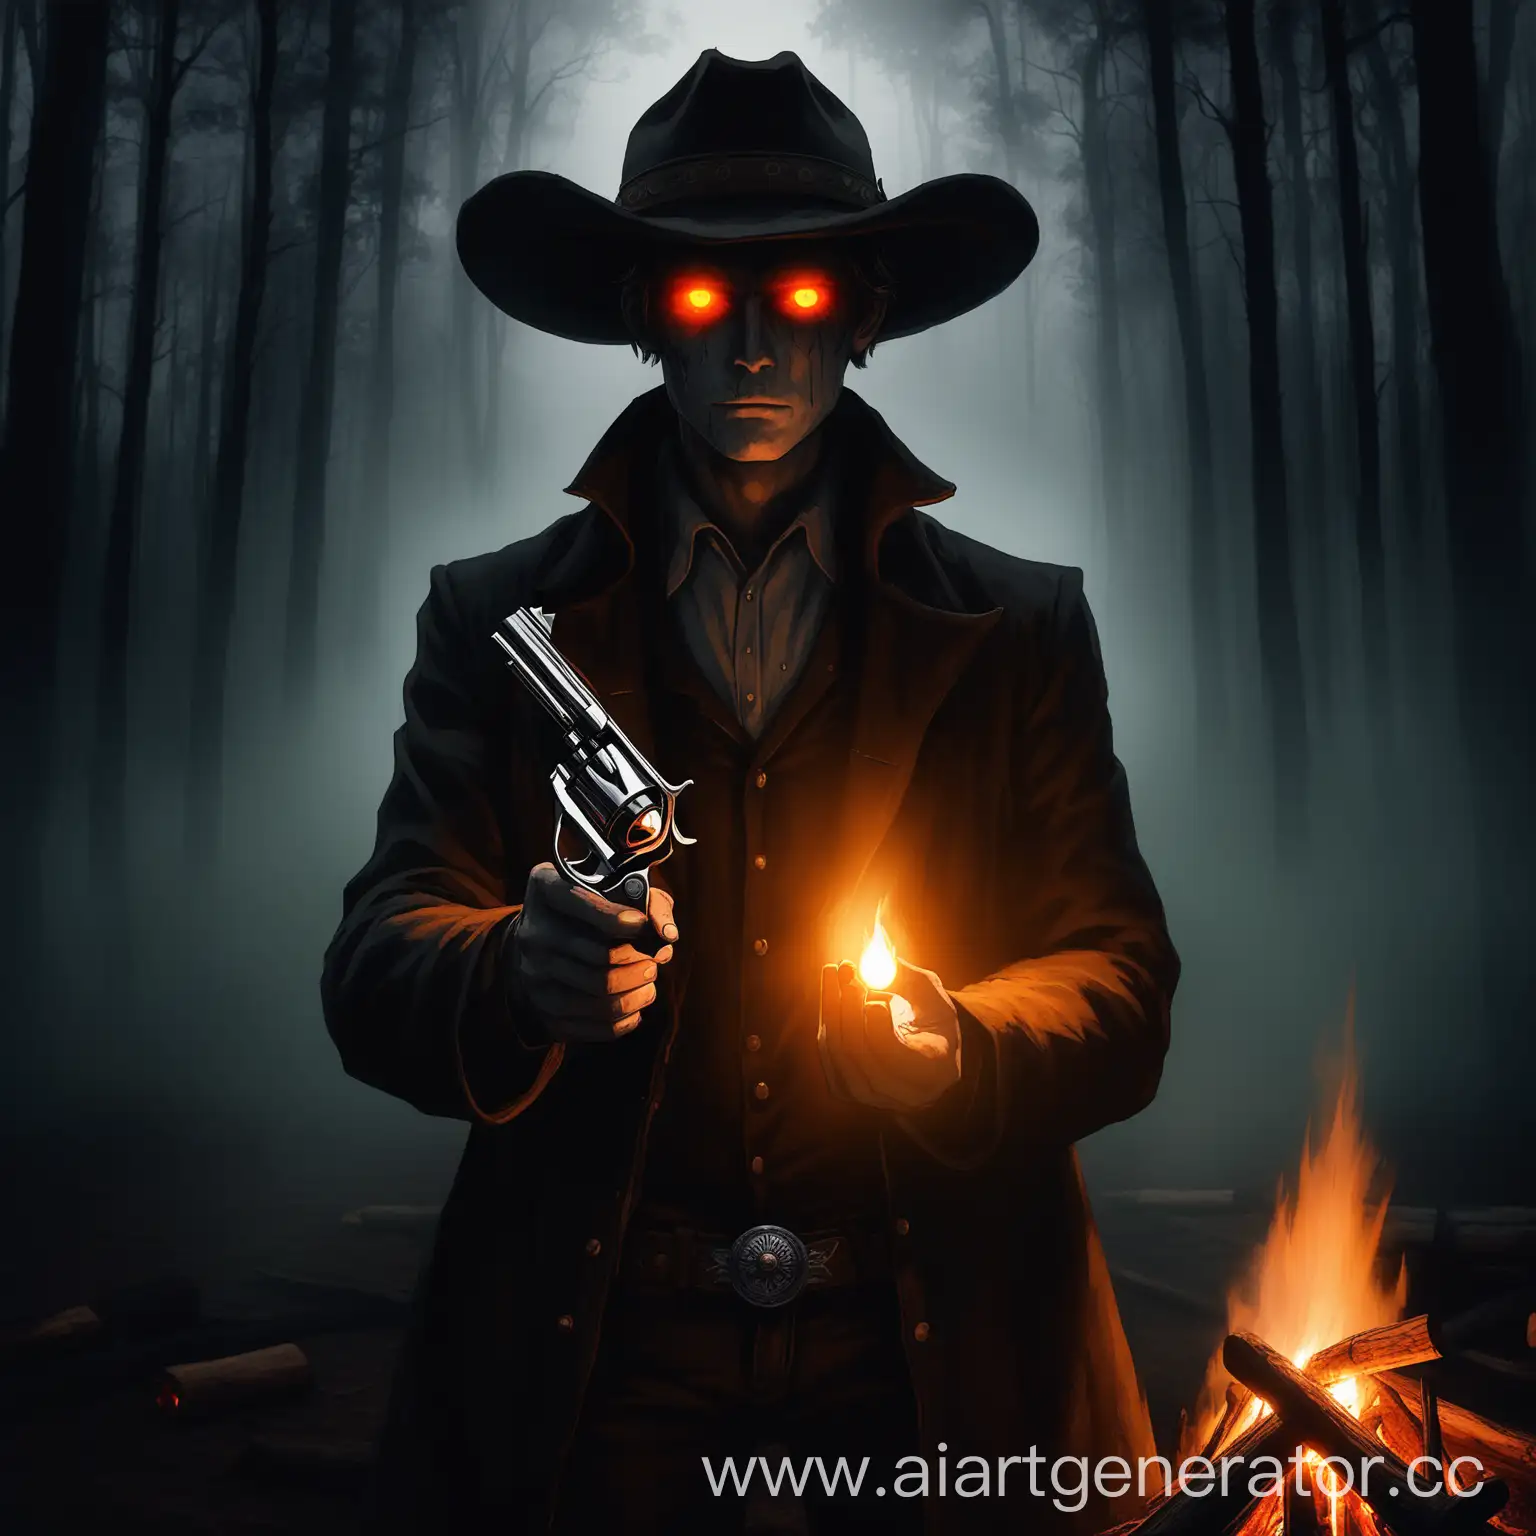 Mysterious-Cowboy-with-Glowing-Eyes-and-Revolver-in-Enigmatic-Forest-Scene